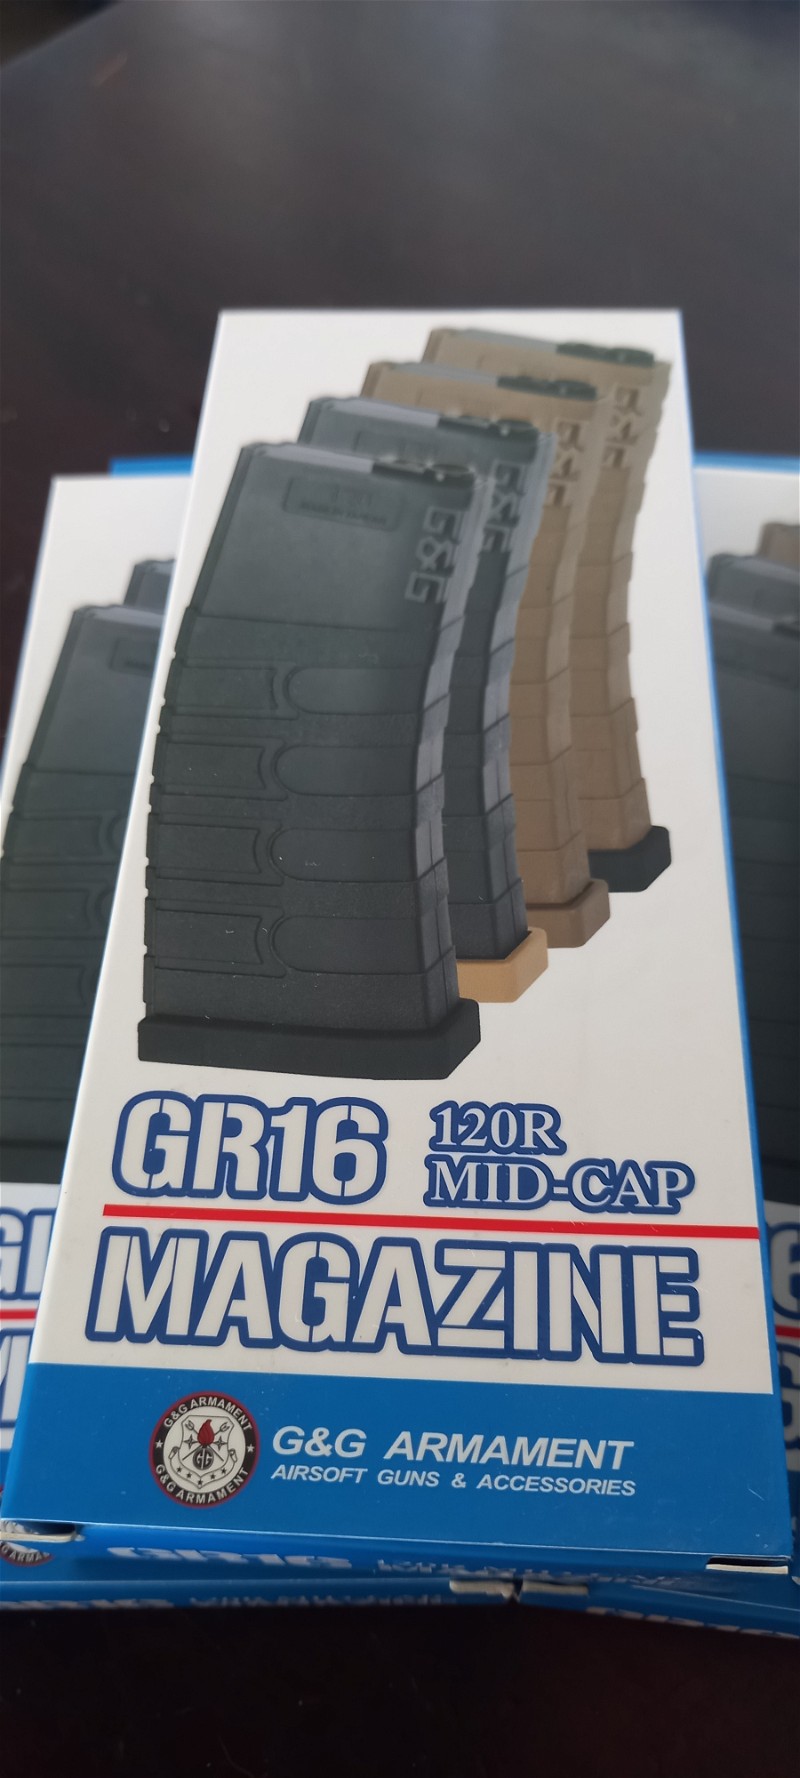 Image 1 for 5x G&G (GR16 Tan magazijnen 120rds